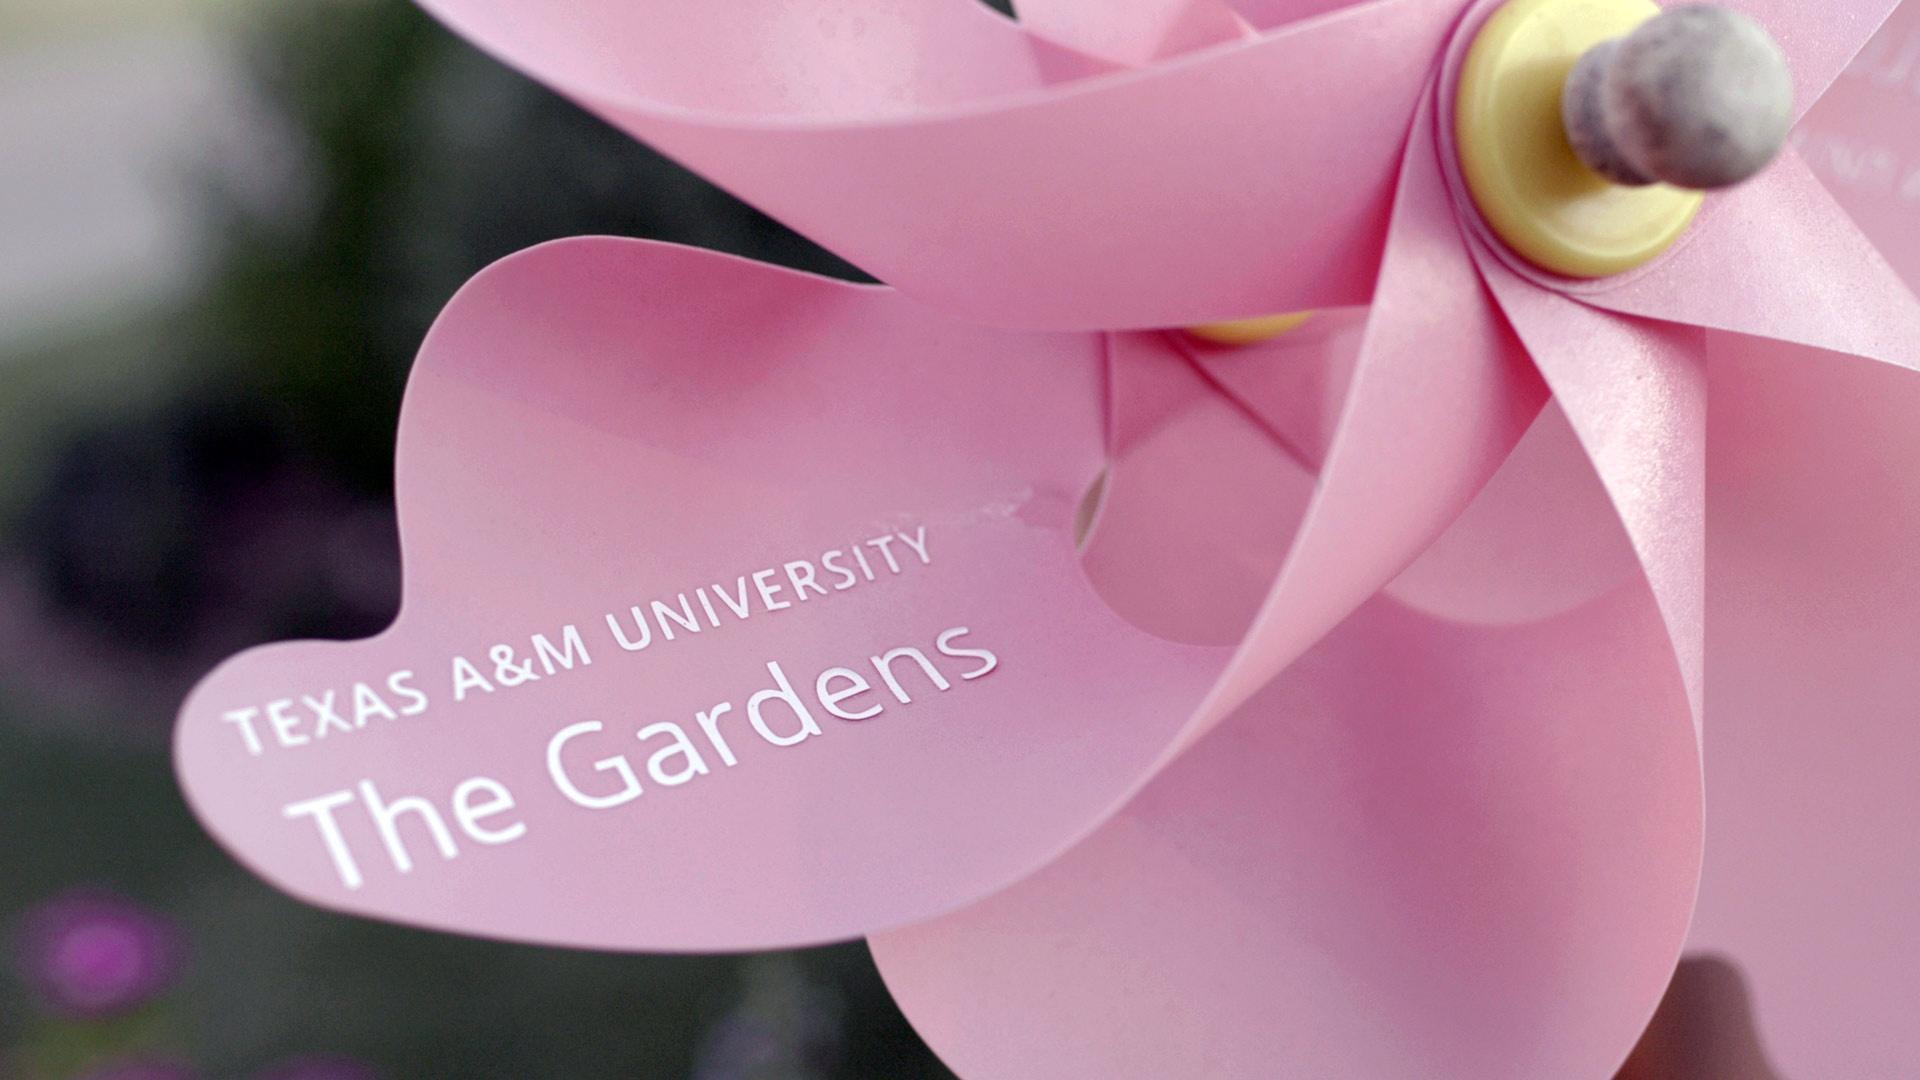 pink pinwheel with "Texas A&M University The Gardens written on it"